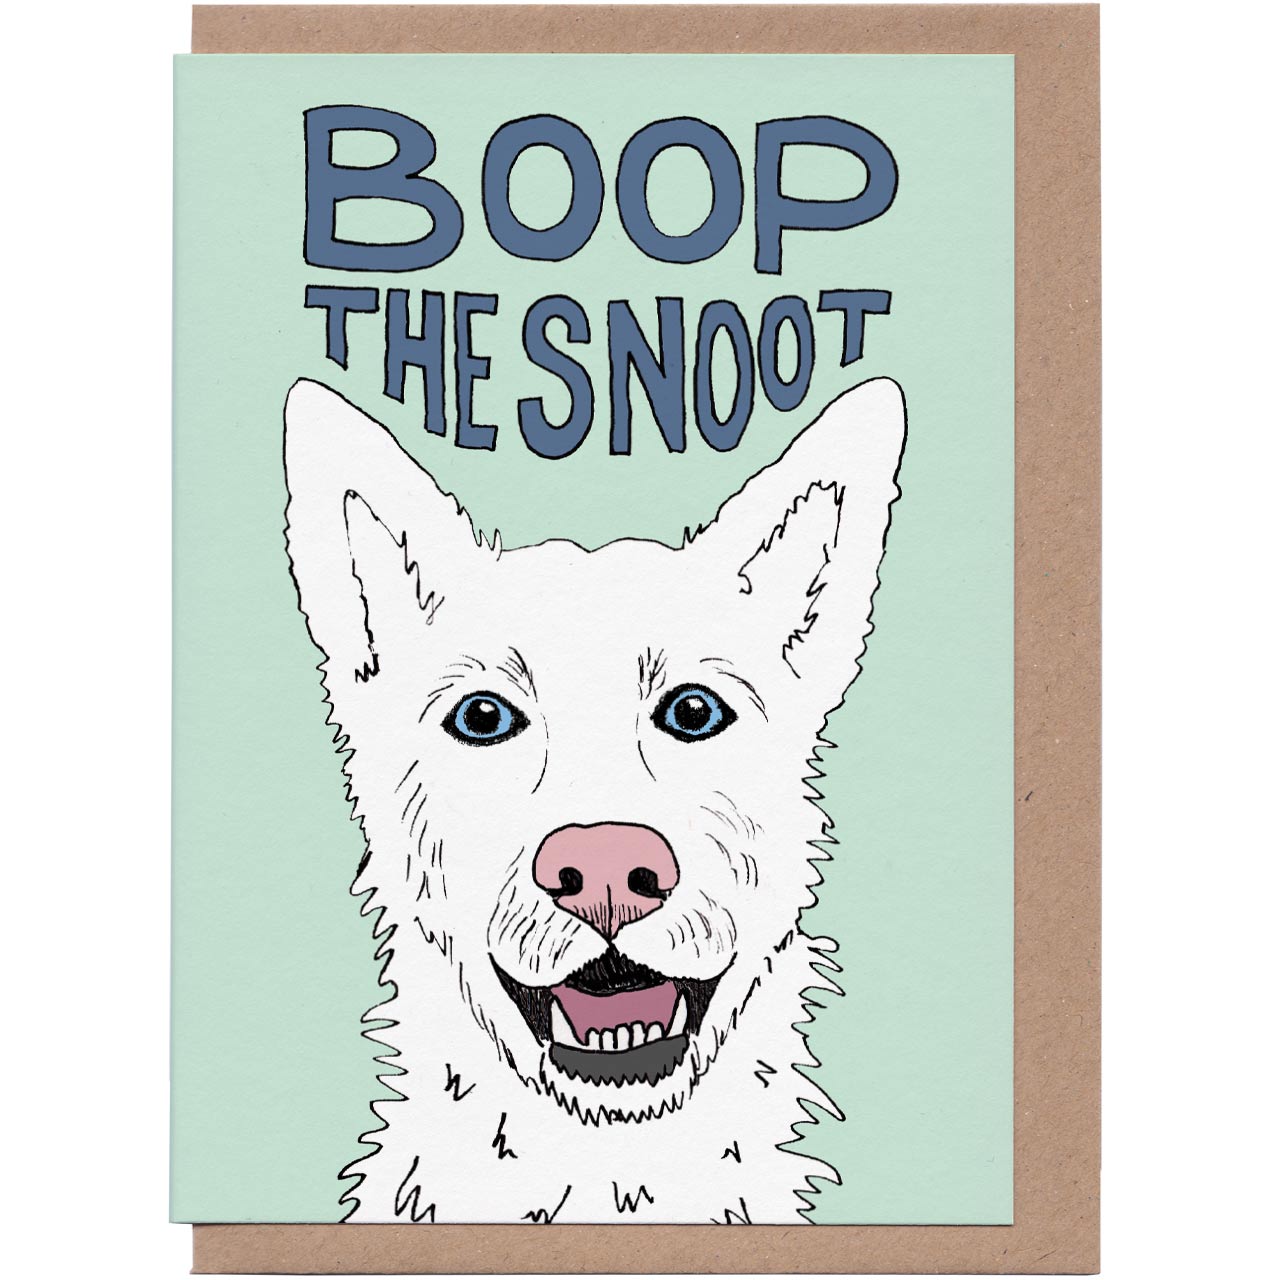 Boop The Snoot Greeting Card